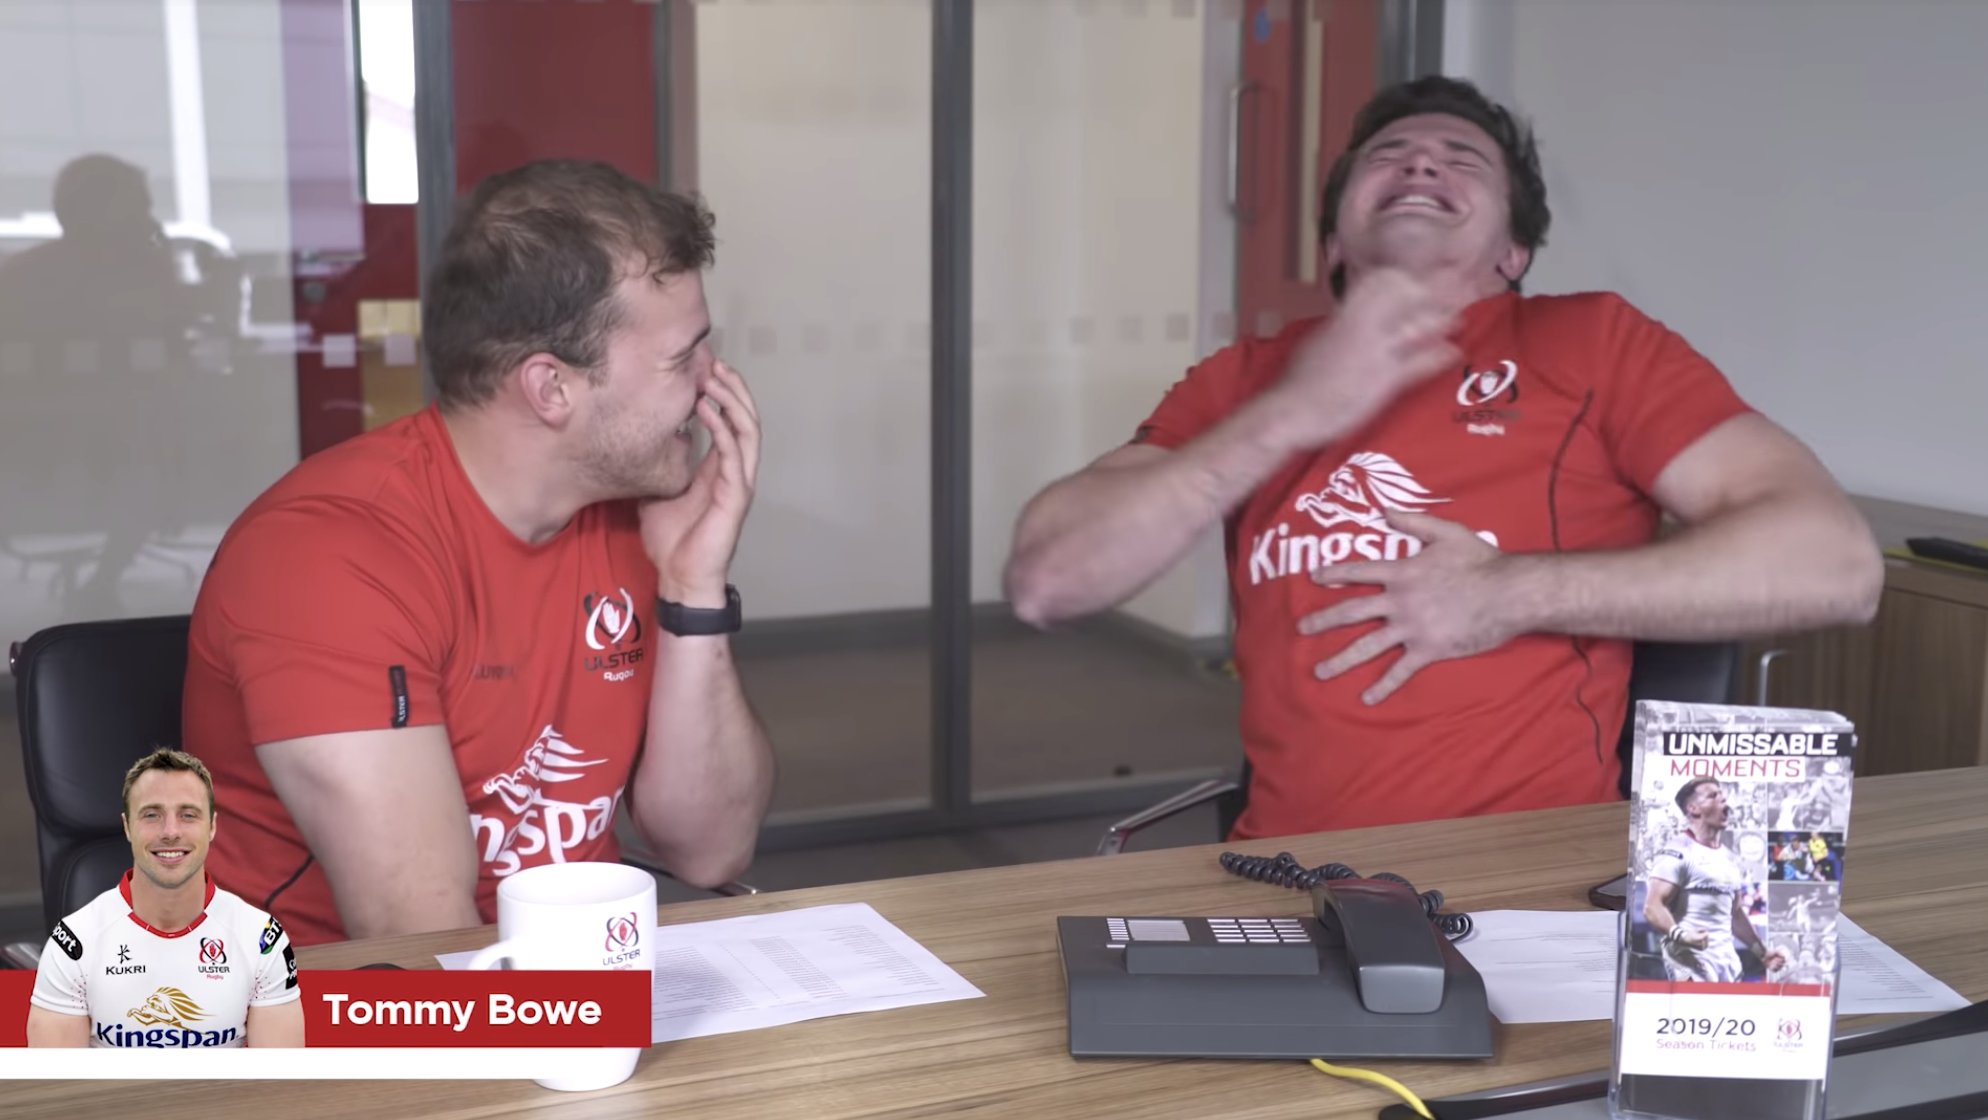 WATCH: Tommy Bowe prank call by Jacob Stockdale is the best thing you'll see all day